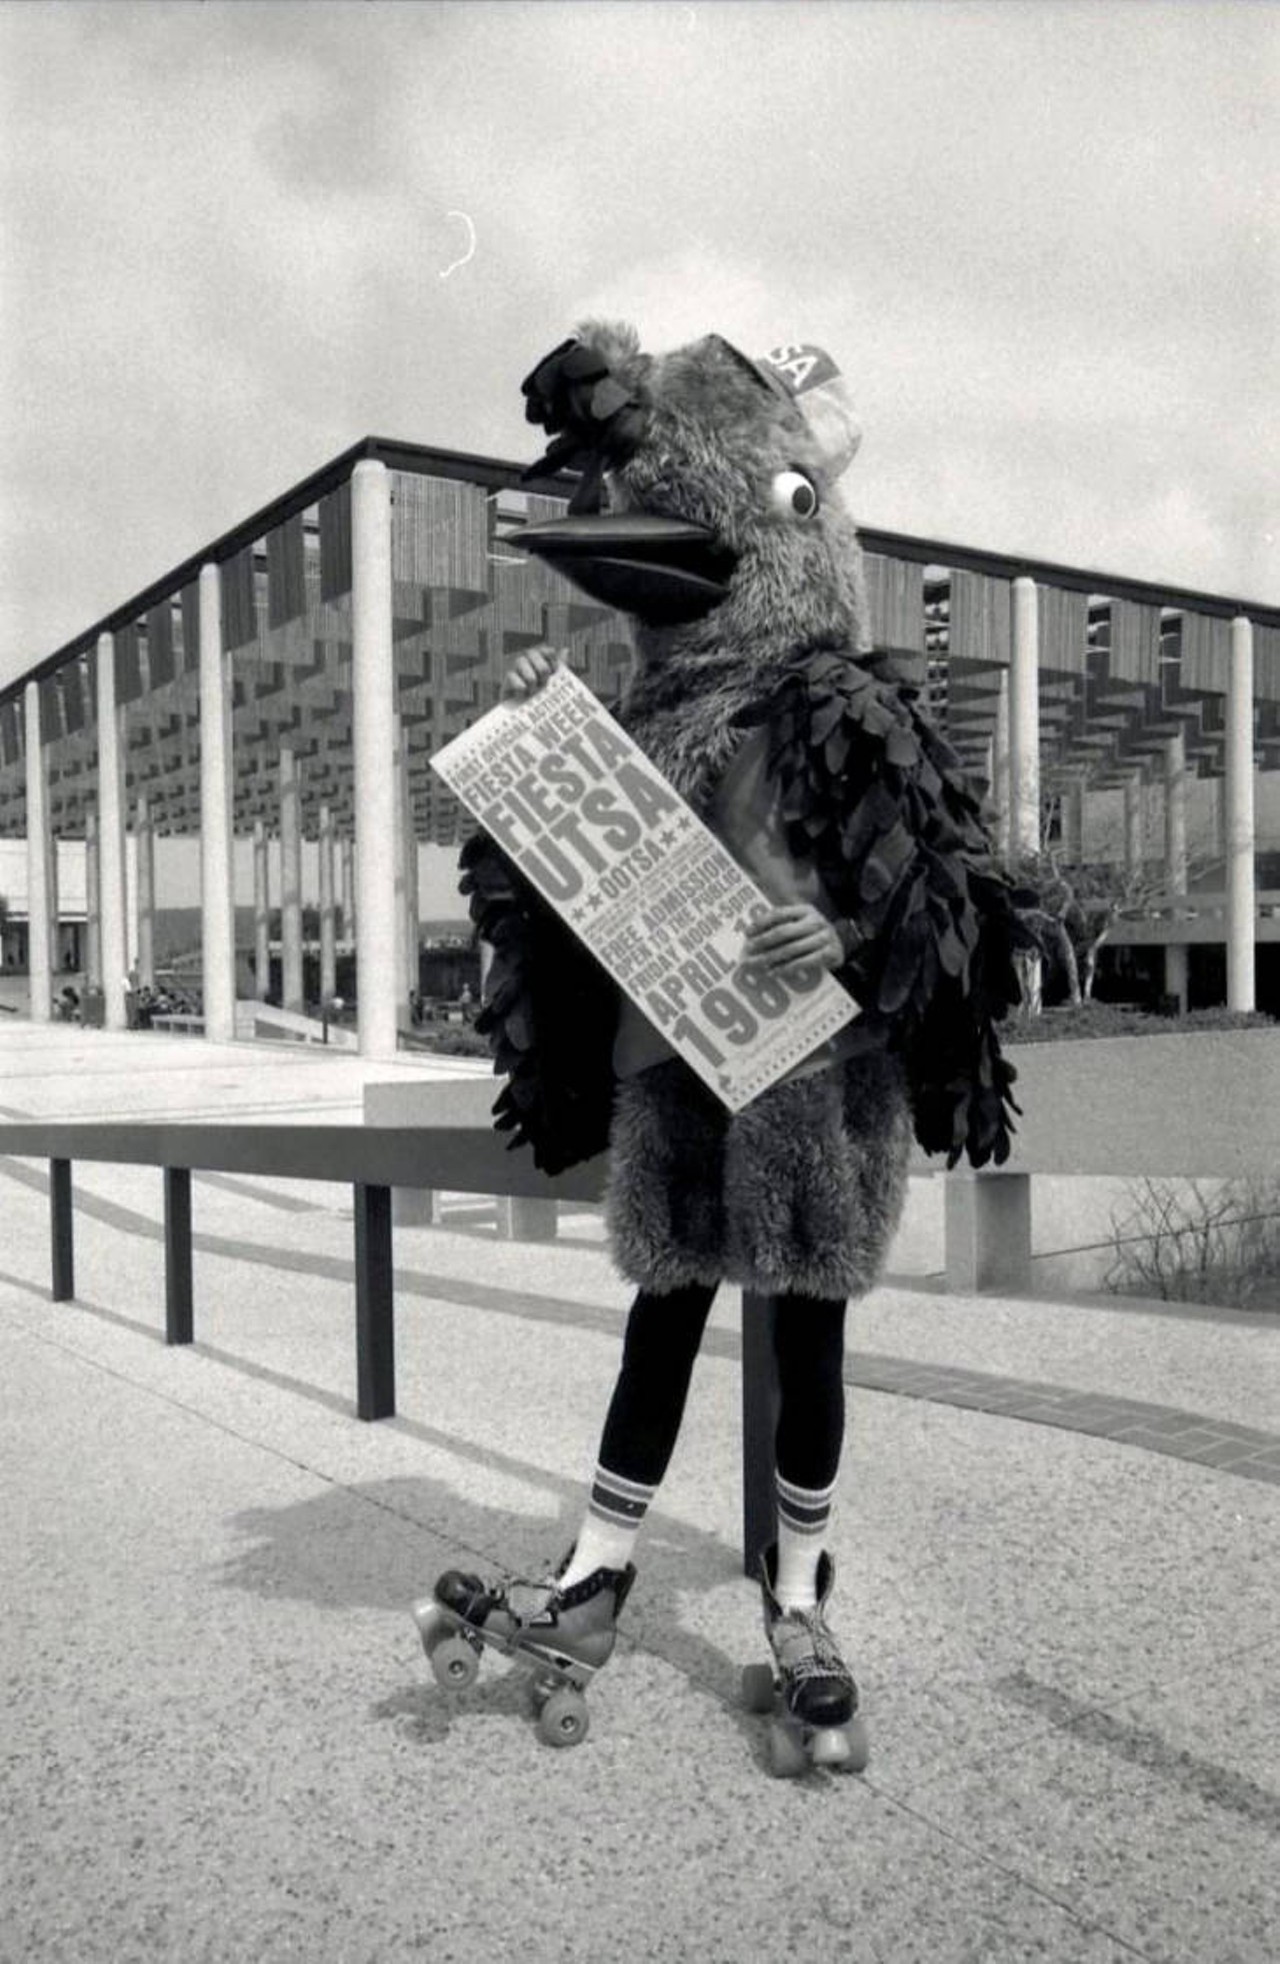 Rowdy the Roadrunner Holding Fiesta UTSA (OOTSA) Poster in Front of Sombrilla
Well... at least it wasn’t as bad as the New Orleans Pelicans’ first mascot. Rowdy would go on to get a much-needed facelift years later.